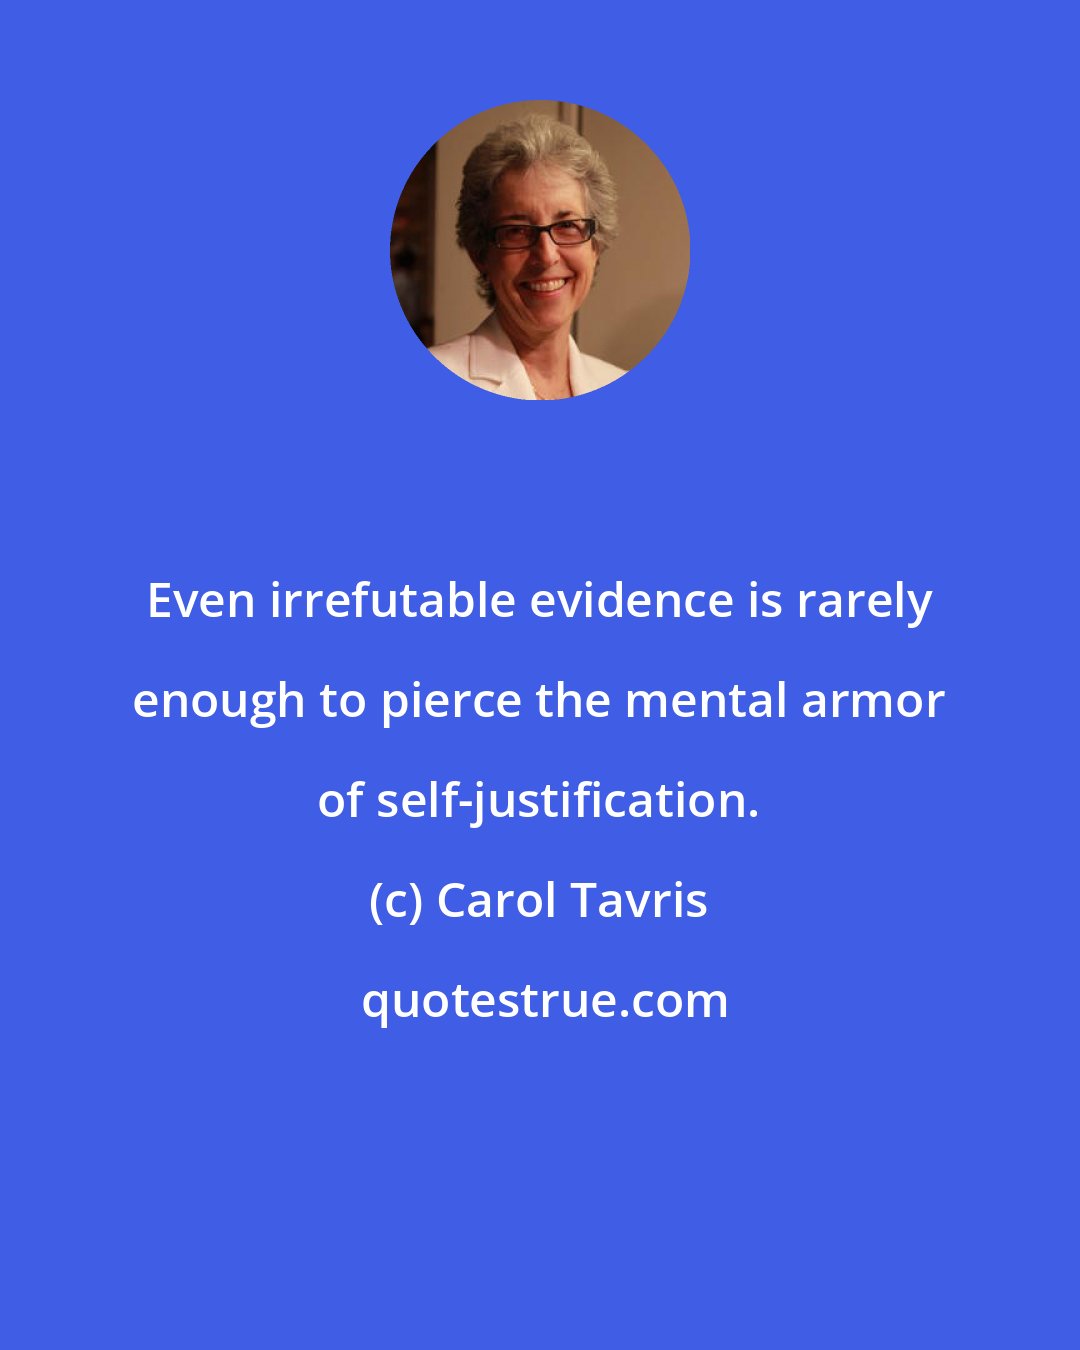 Carol Tavris: Even irrefutable evidence is rarely enough to pierce the mental armor of self-justification.